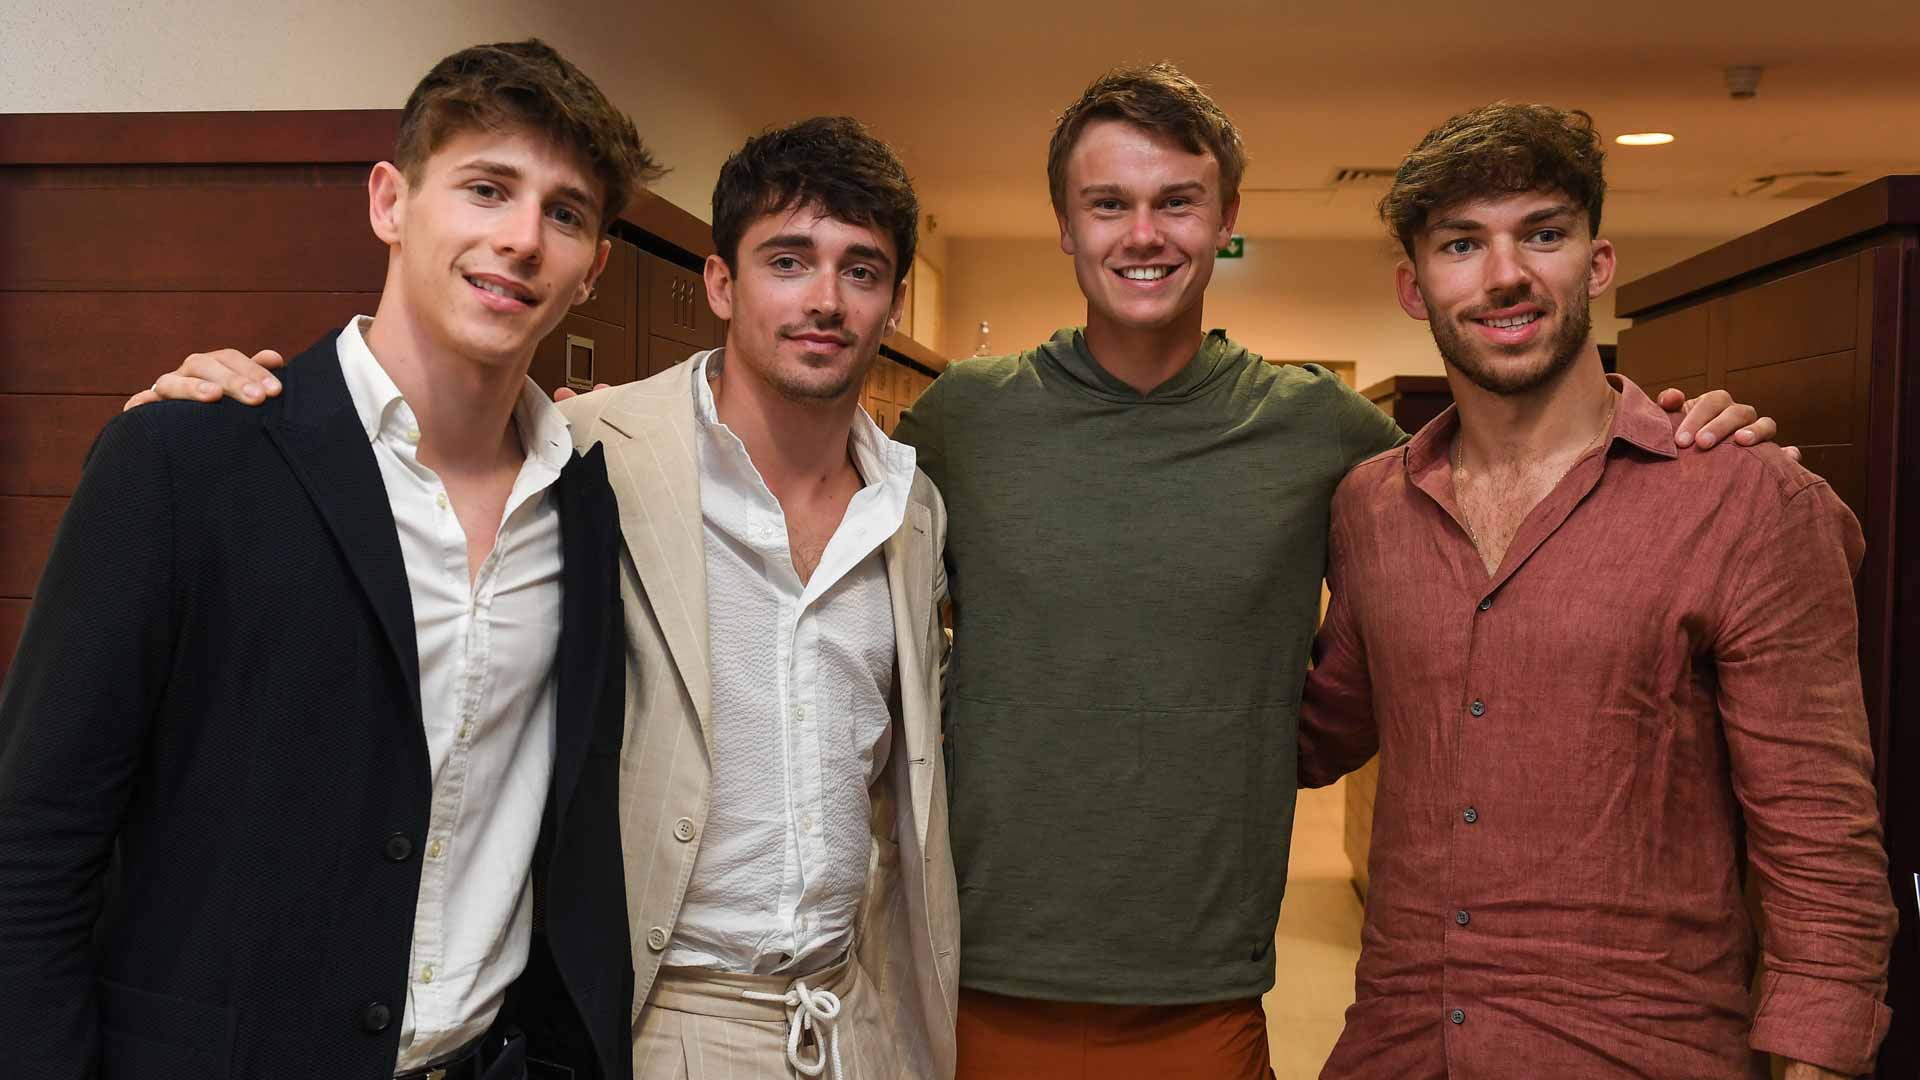 From left to right: Arthur Leclerc, Charles Leclerc, <a href='https://www.atptour.com/en/players/holger-rune/r0dg/overview'>Holger Rune</a>, and Pierre Gasly.